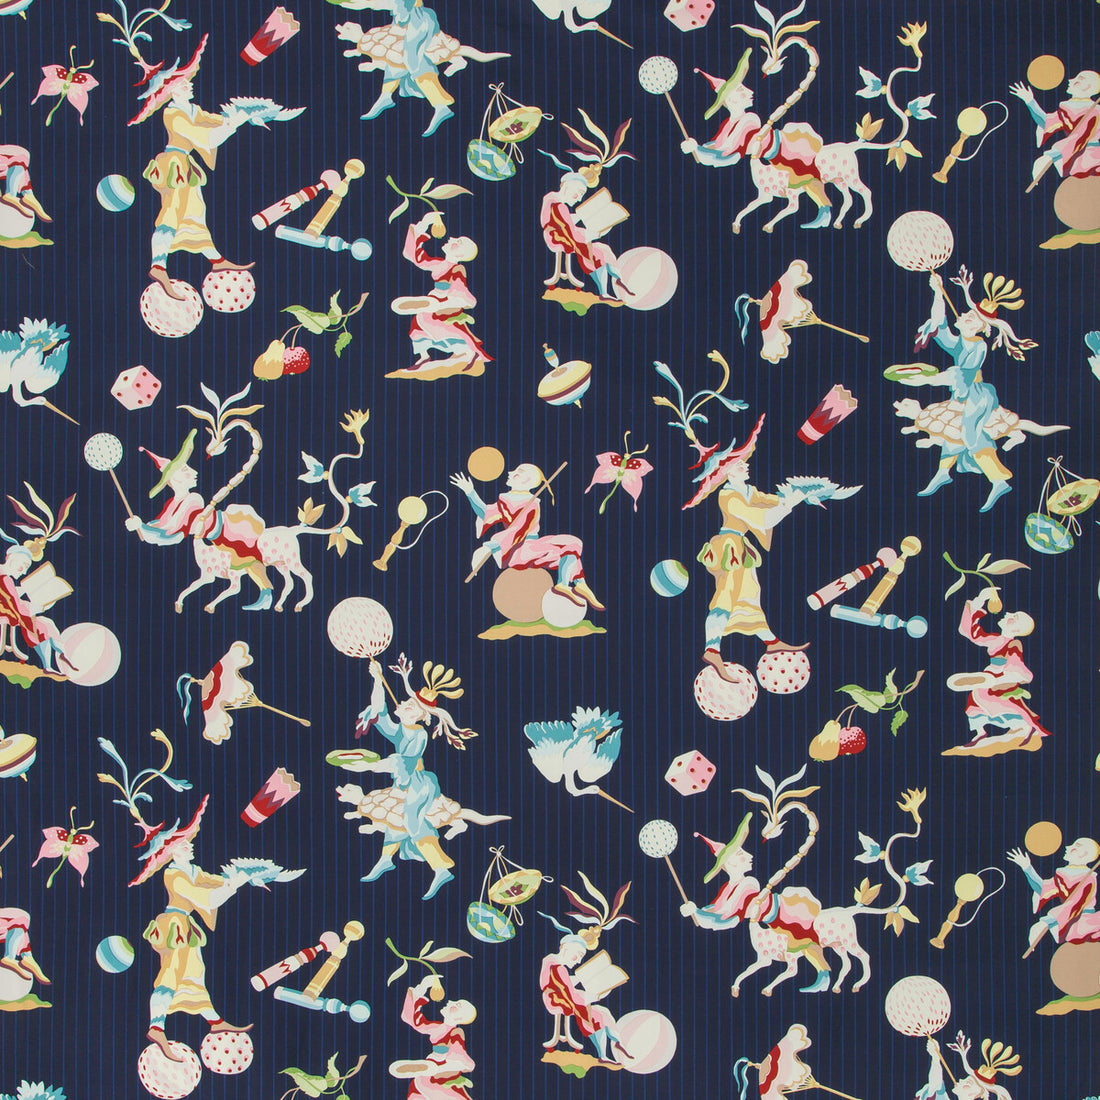 Cirque Chinois Print fabric in navy color - pattern 8019141.55.0 - by Brunschwig &amp; Fils in the Summer Palace collection